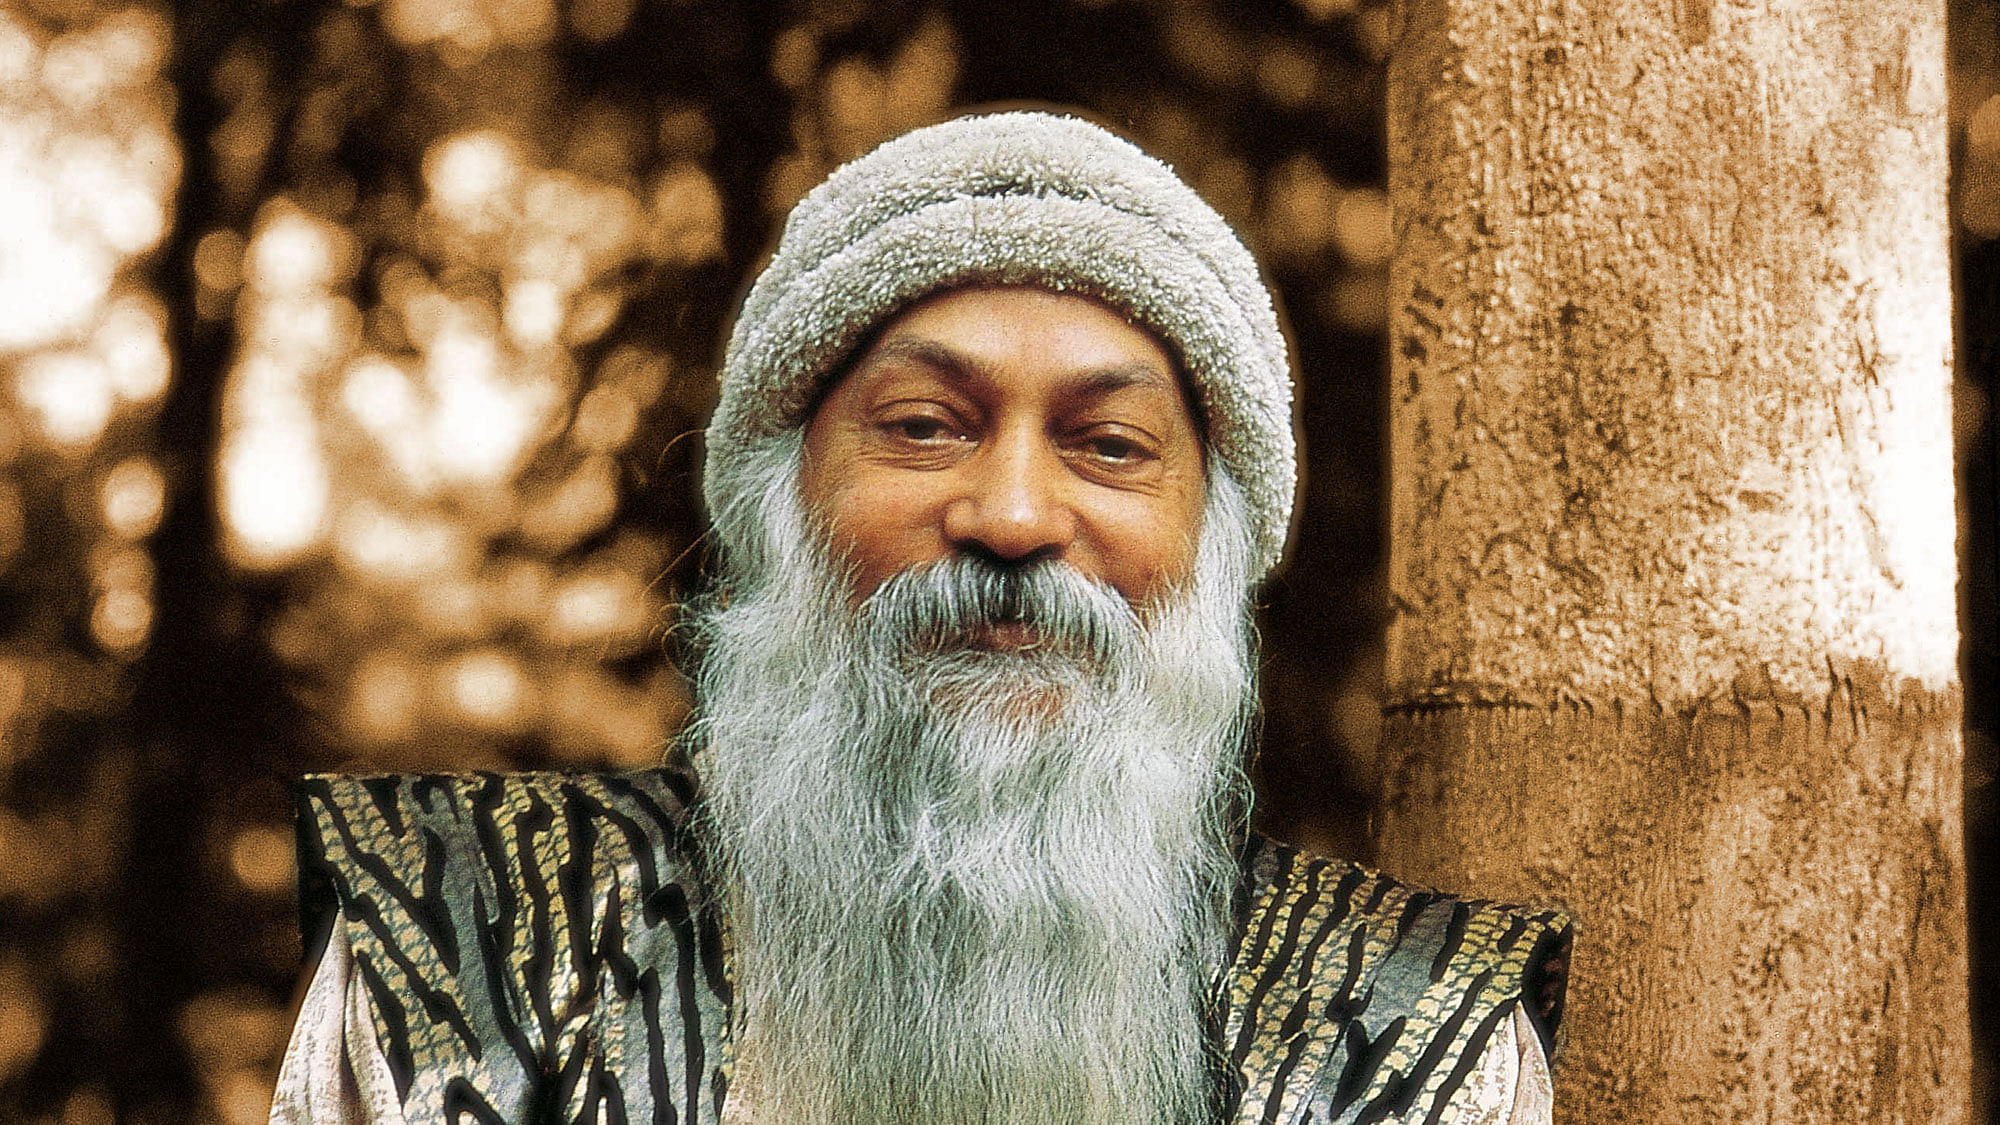 (Photo courtesy: <a href="http://www.sannyas.wiki/index.php?title=Images_of_Osho">sanyas.wiki</a>/Altered by <b>The Quint</b>)